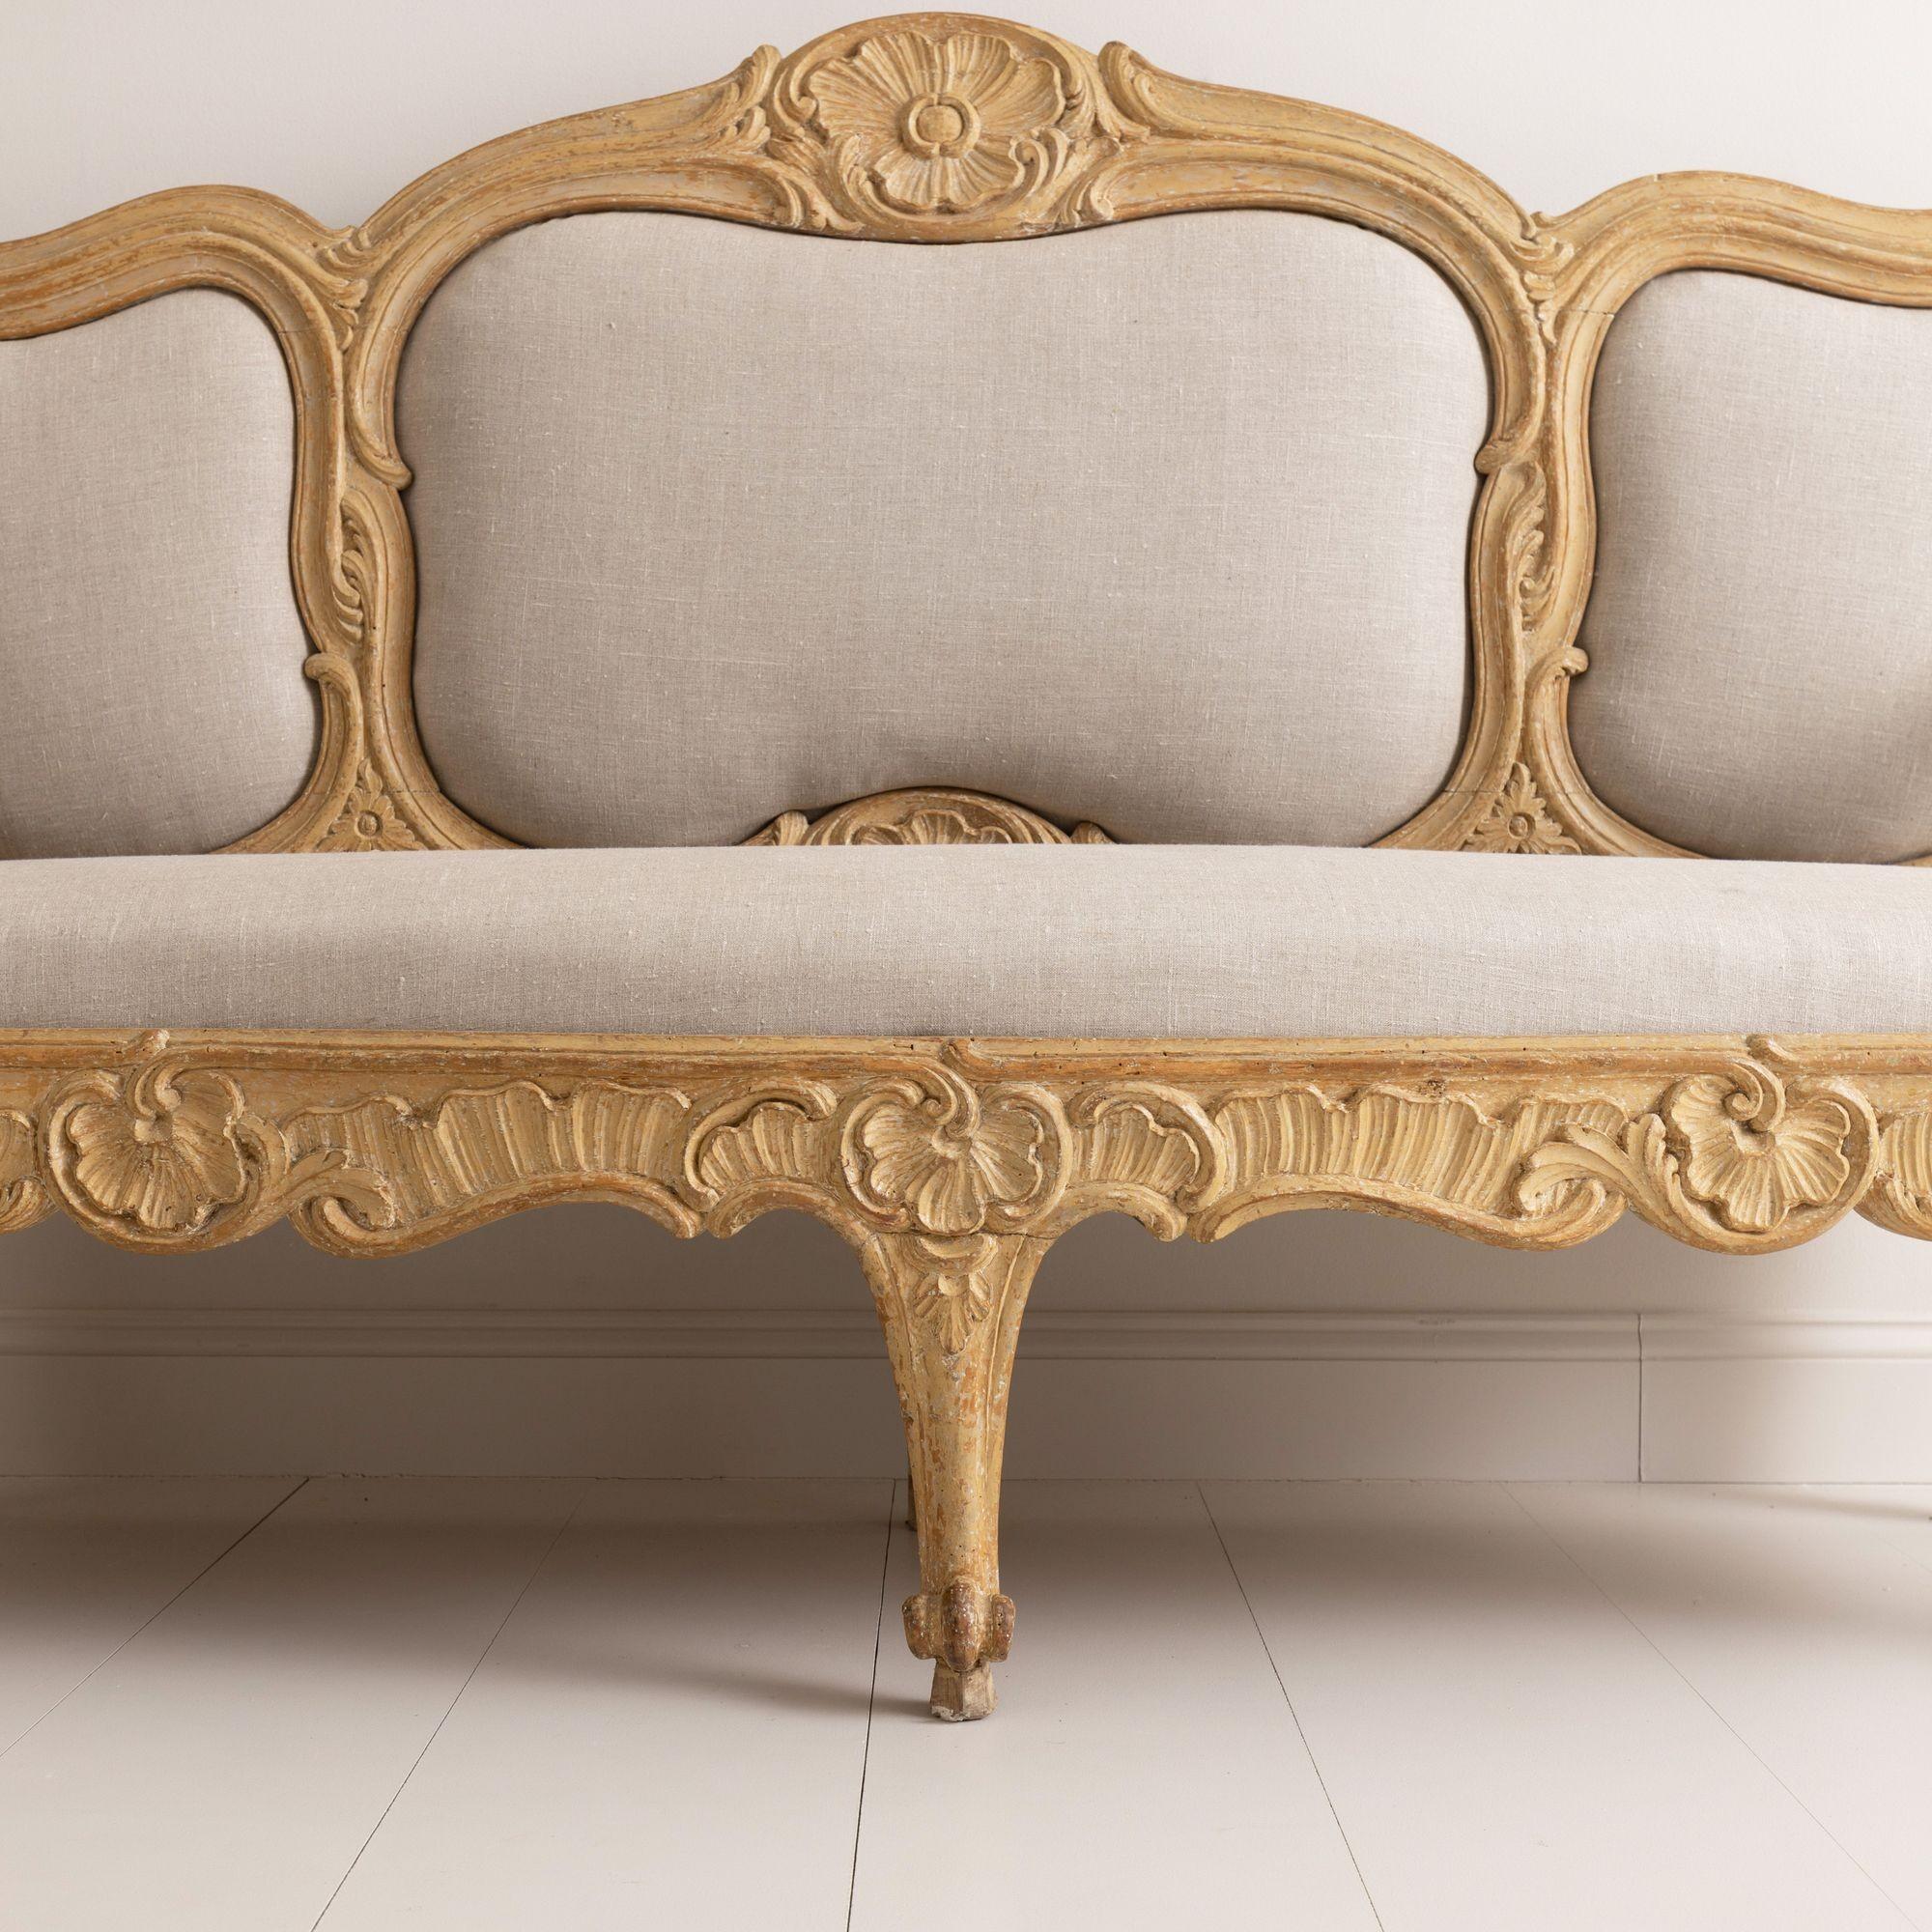 18th C. Swedish Rococo Sofa Bench in Original Paint from Stockholm 4